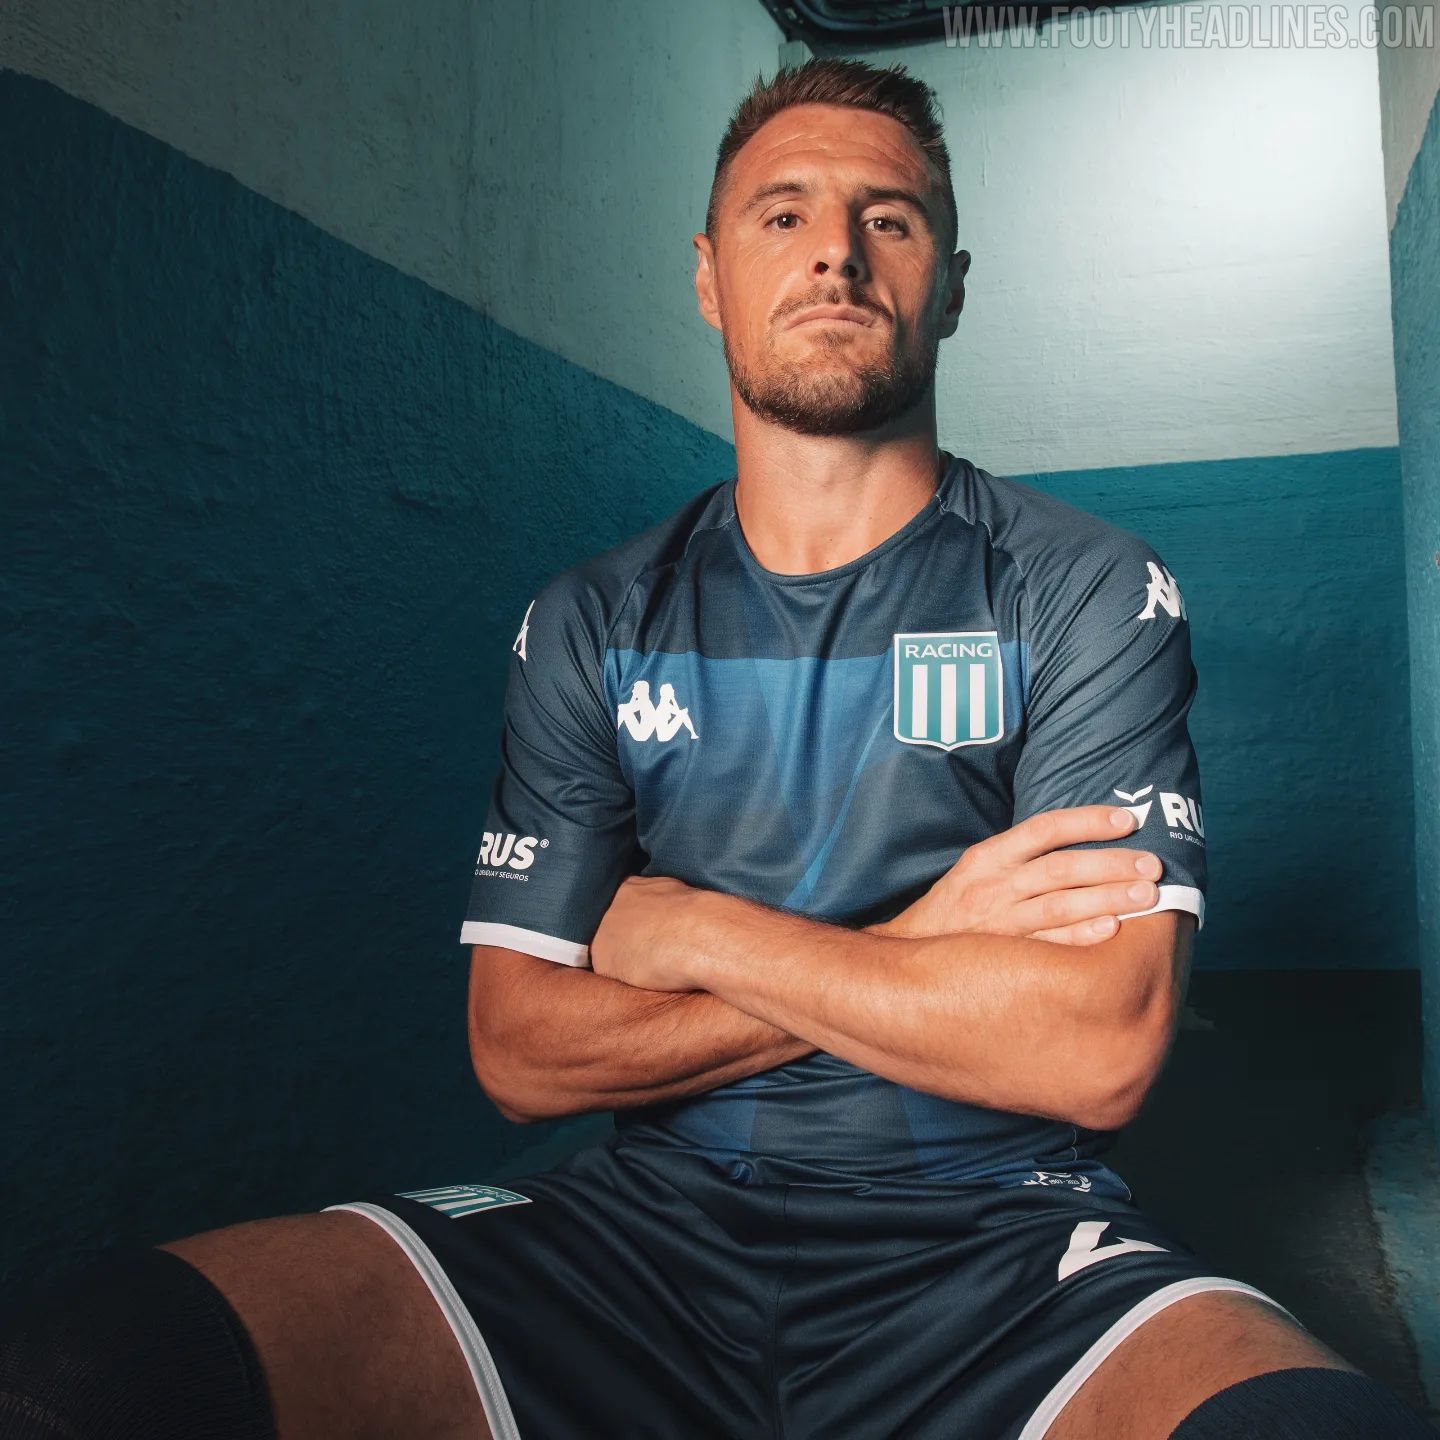 Racing Club of Montevideo home kit for 2012-13.